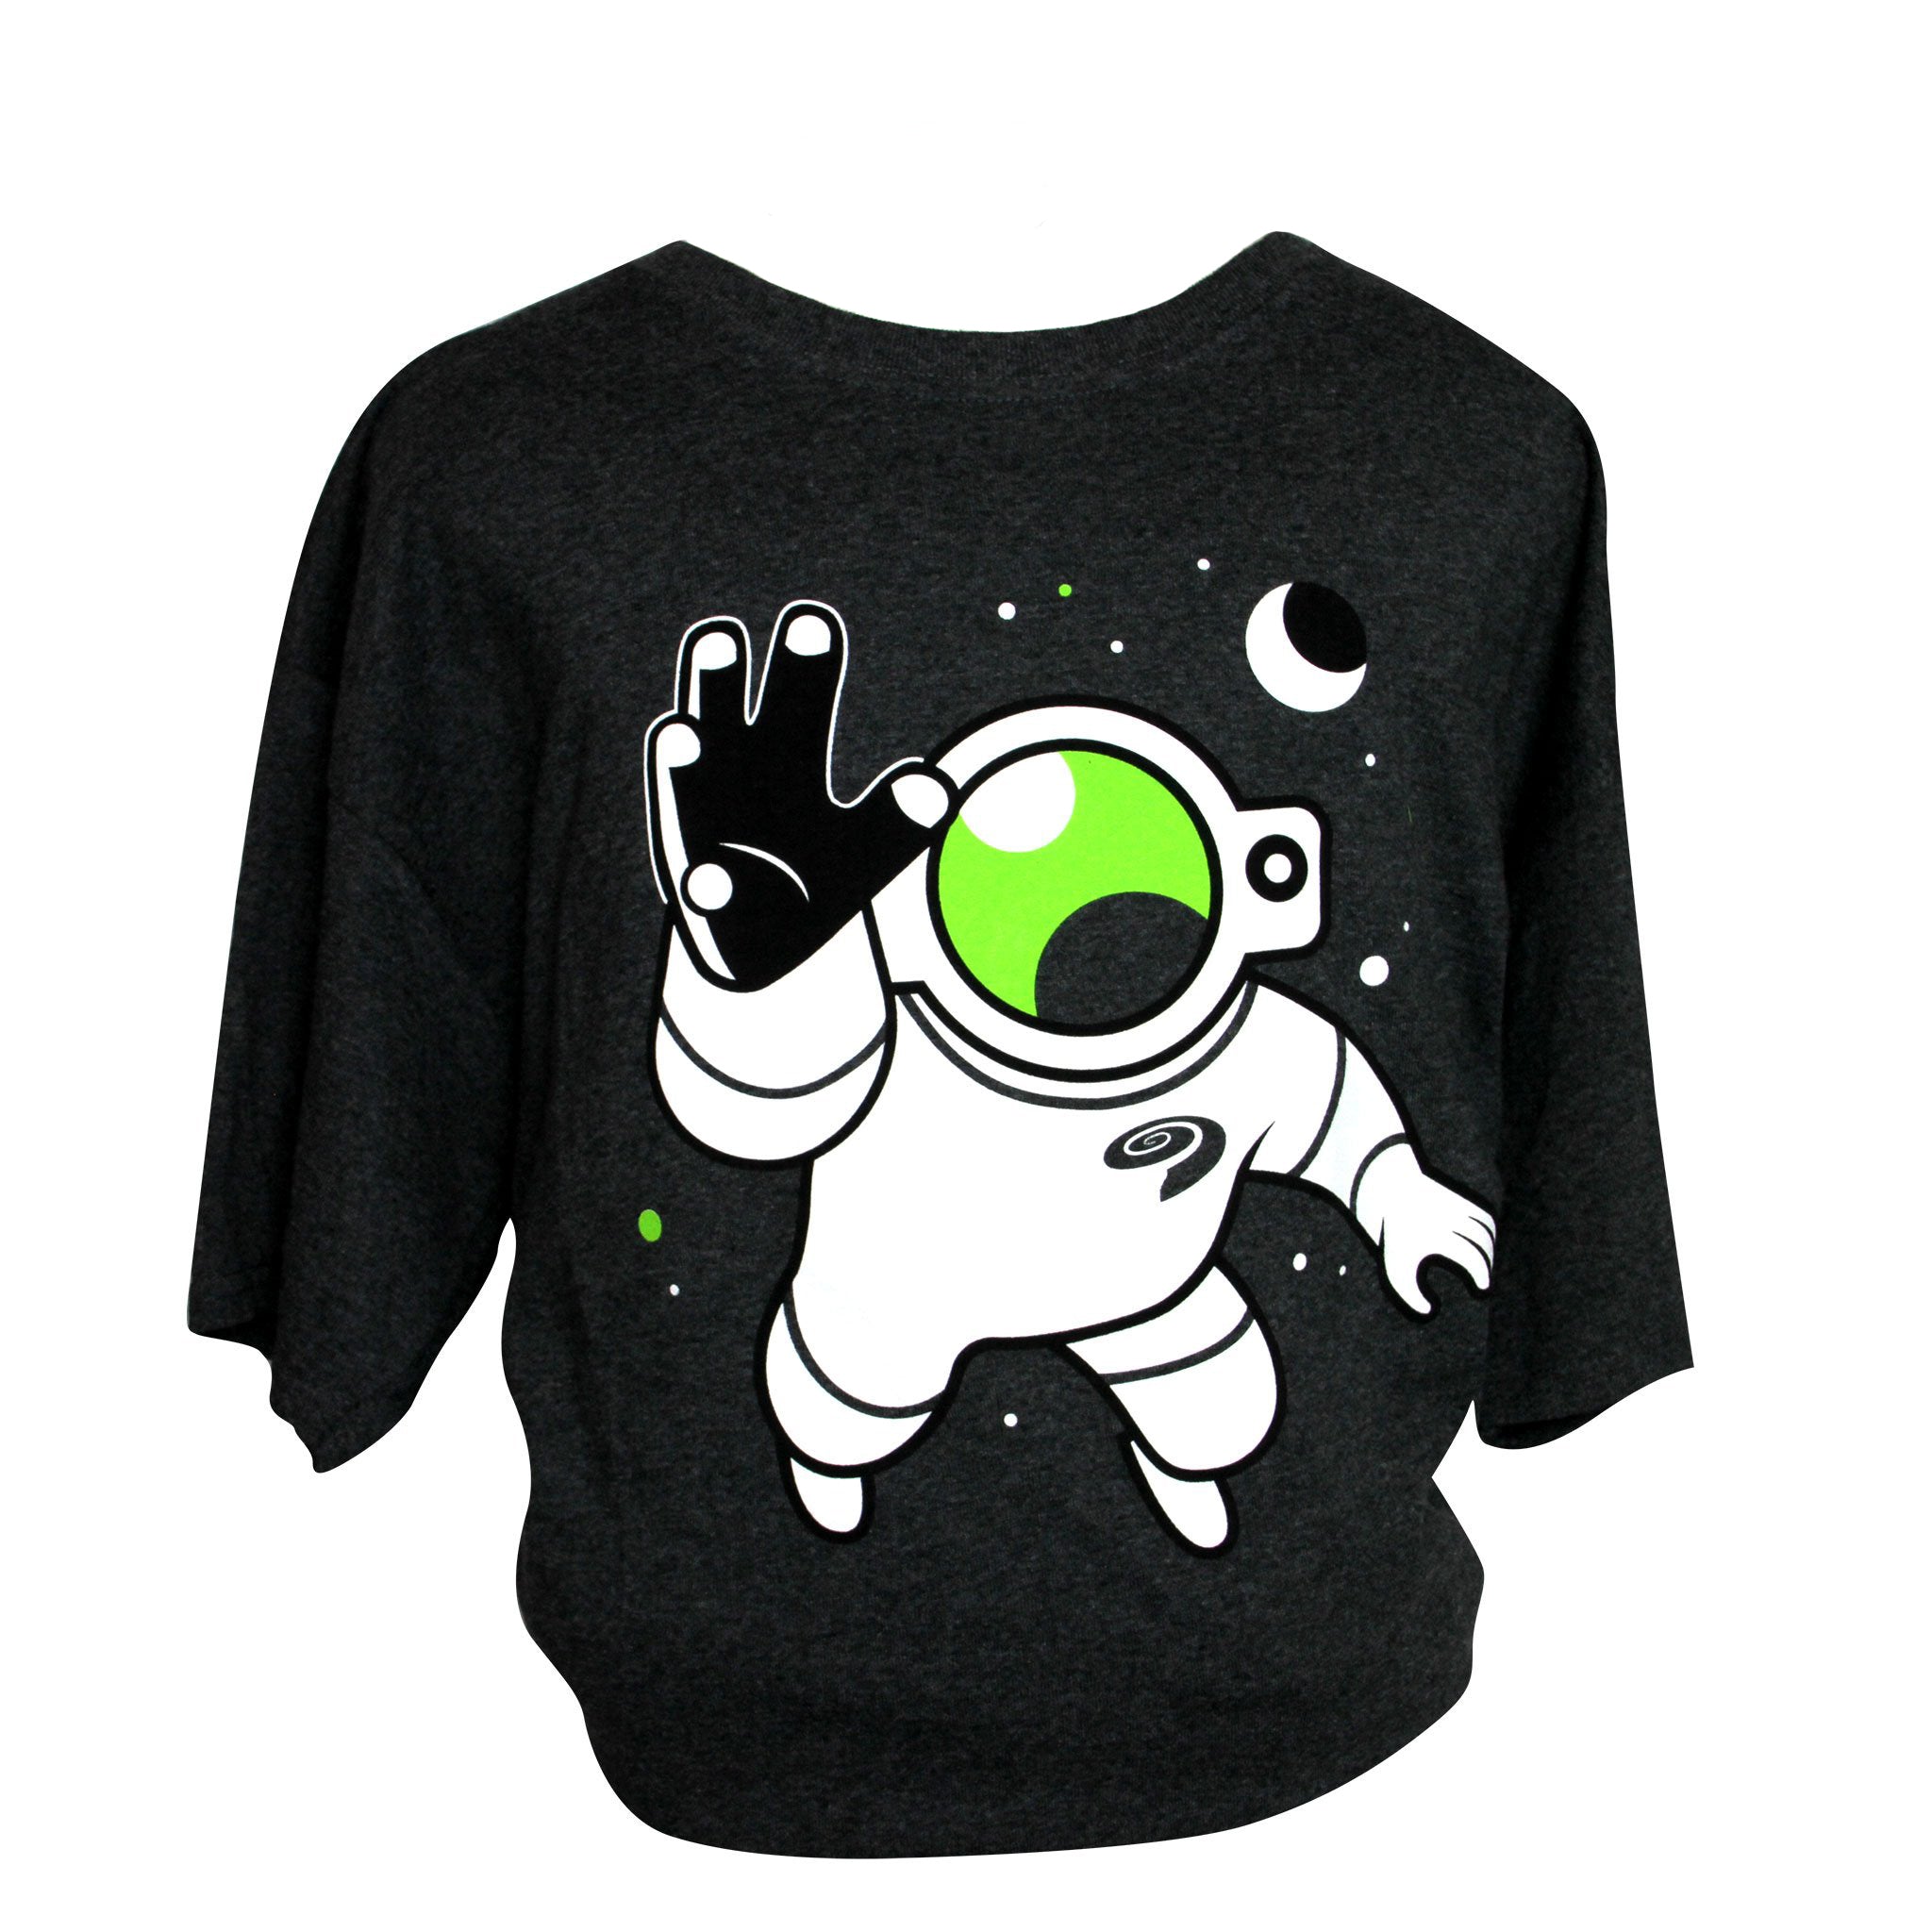 Promotional Designs Astronaut T-Shirt: Youth Large